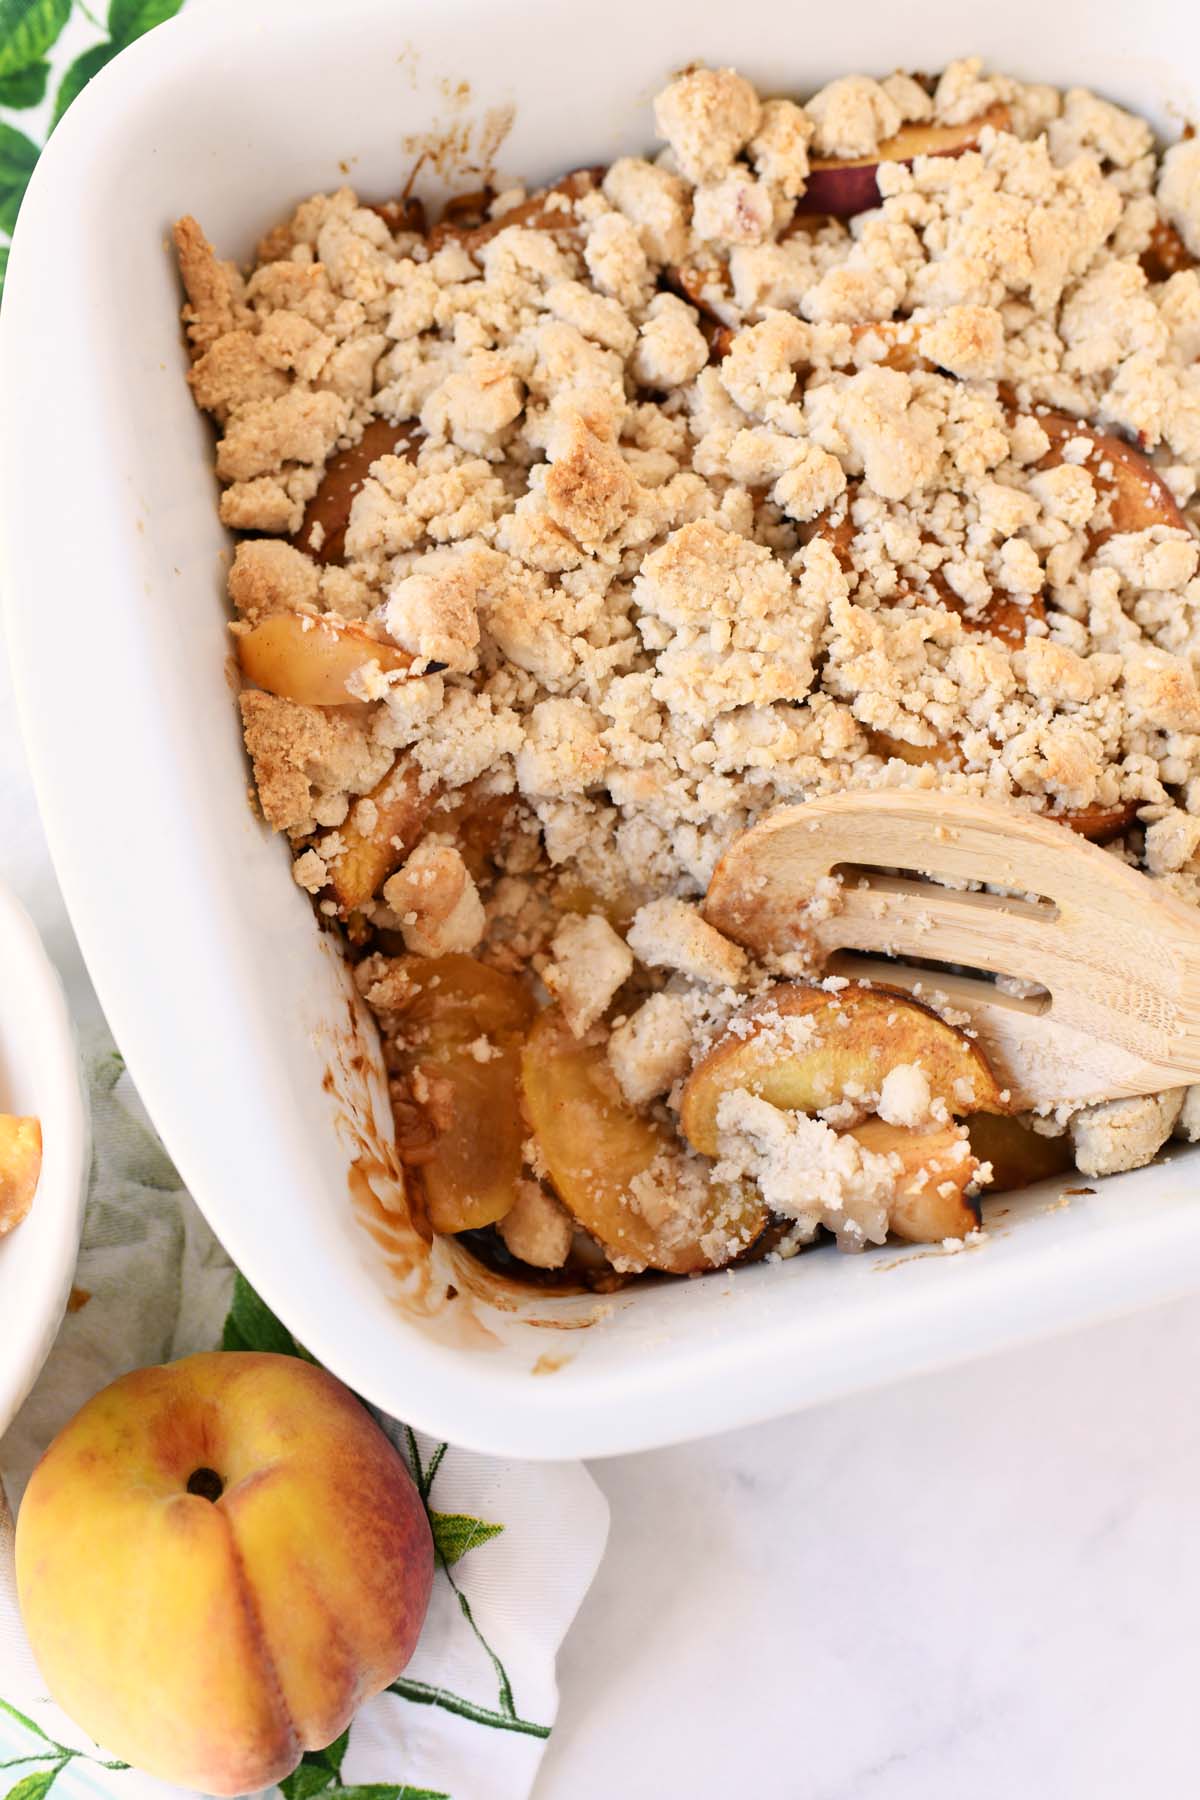 Fresh peach crumble, baked with a wooden spoon taking out some crumble from the pan.